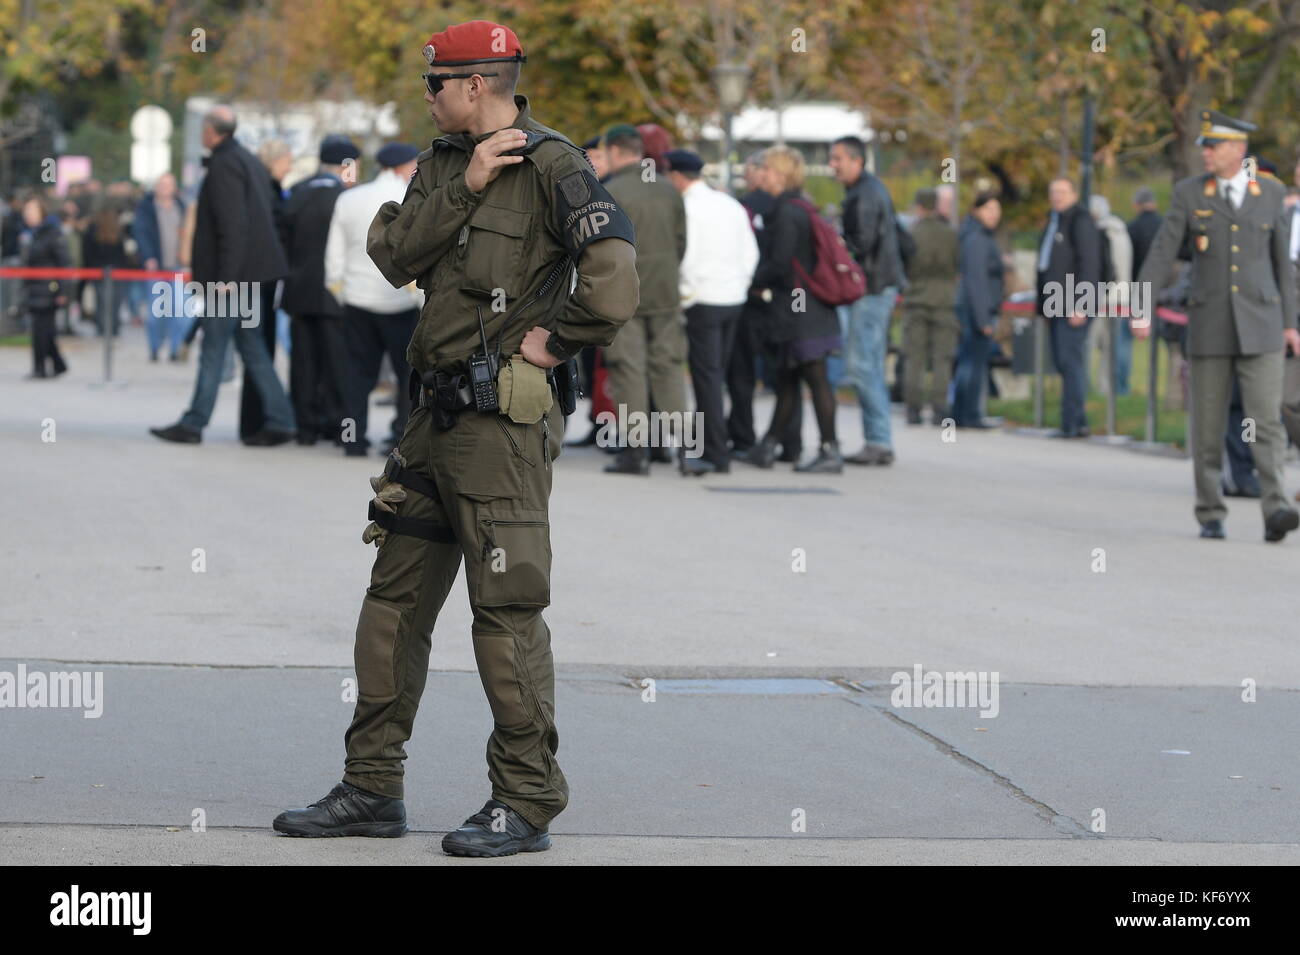 Vienna, Austria. 26 October 2017. Austrian National Day 2017 in the presence of the Federal President and the Austrian Federal Government at Heldenplatz in Vienna. Over 1000 recruits were engaged in the service in the army. In the picture military police. Credit: Franz Perc / Alamy Live News Stock Photo